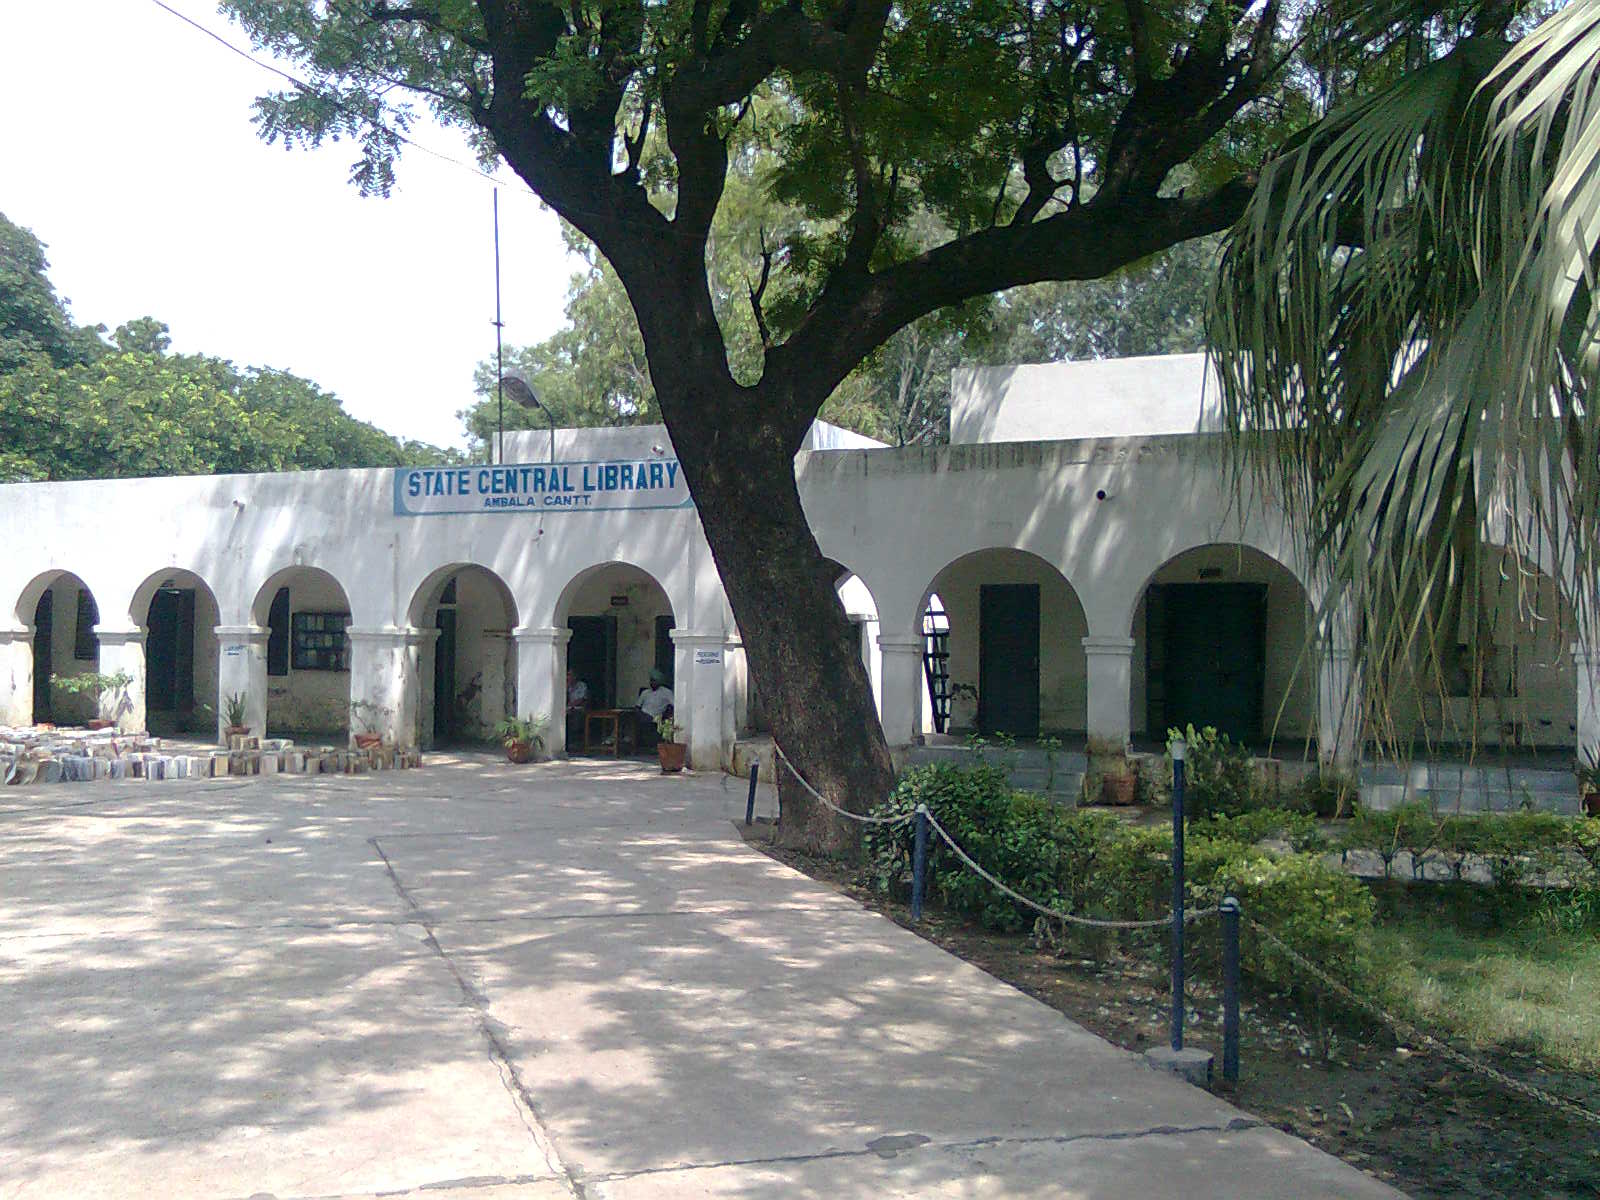 Central State Library, Ambala Cantt.